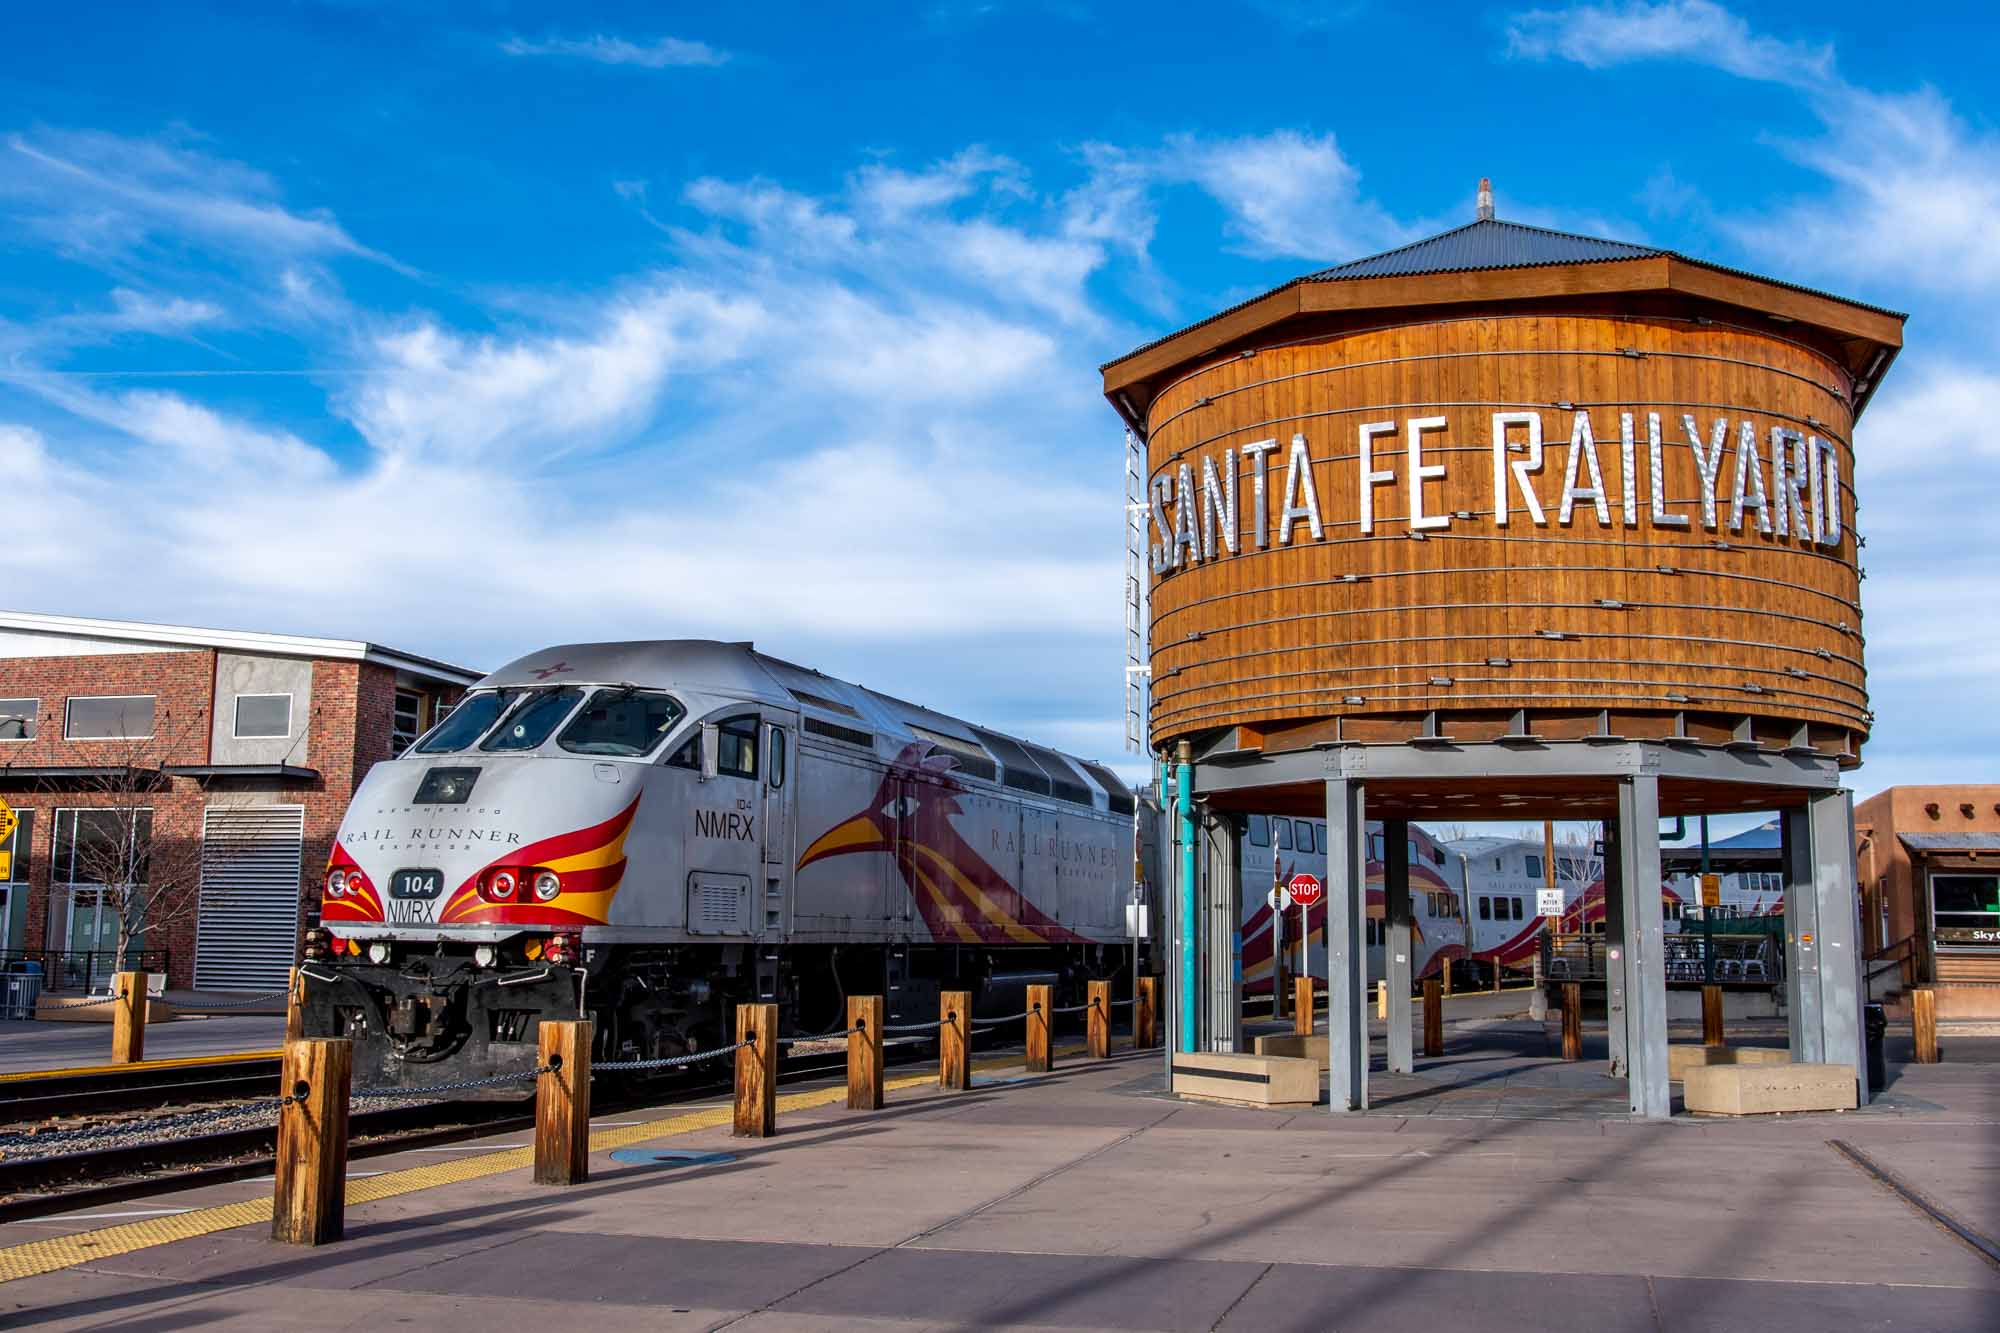 Round water tower labeled "Santa Fe Railyard" next to a gray train.